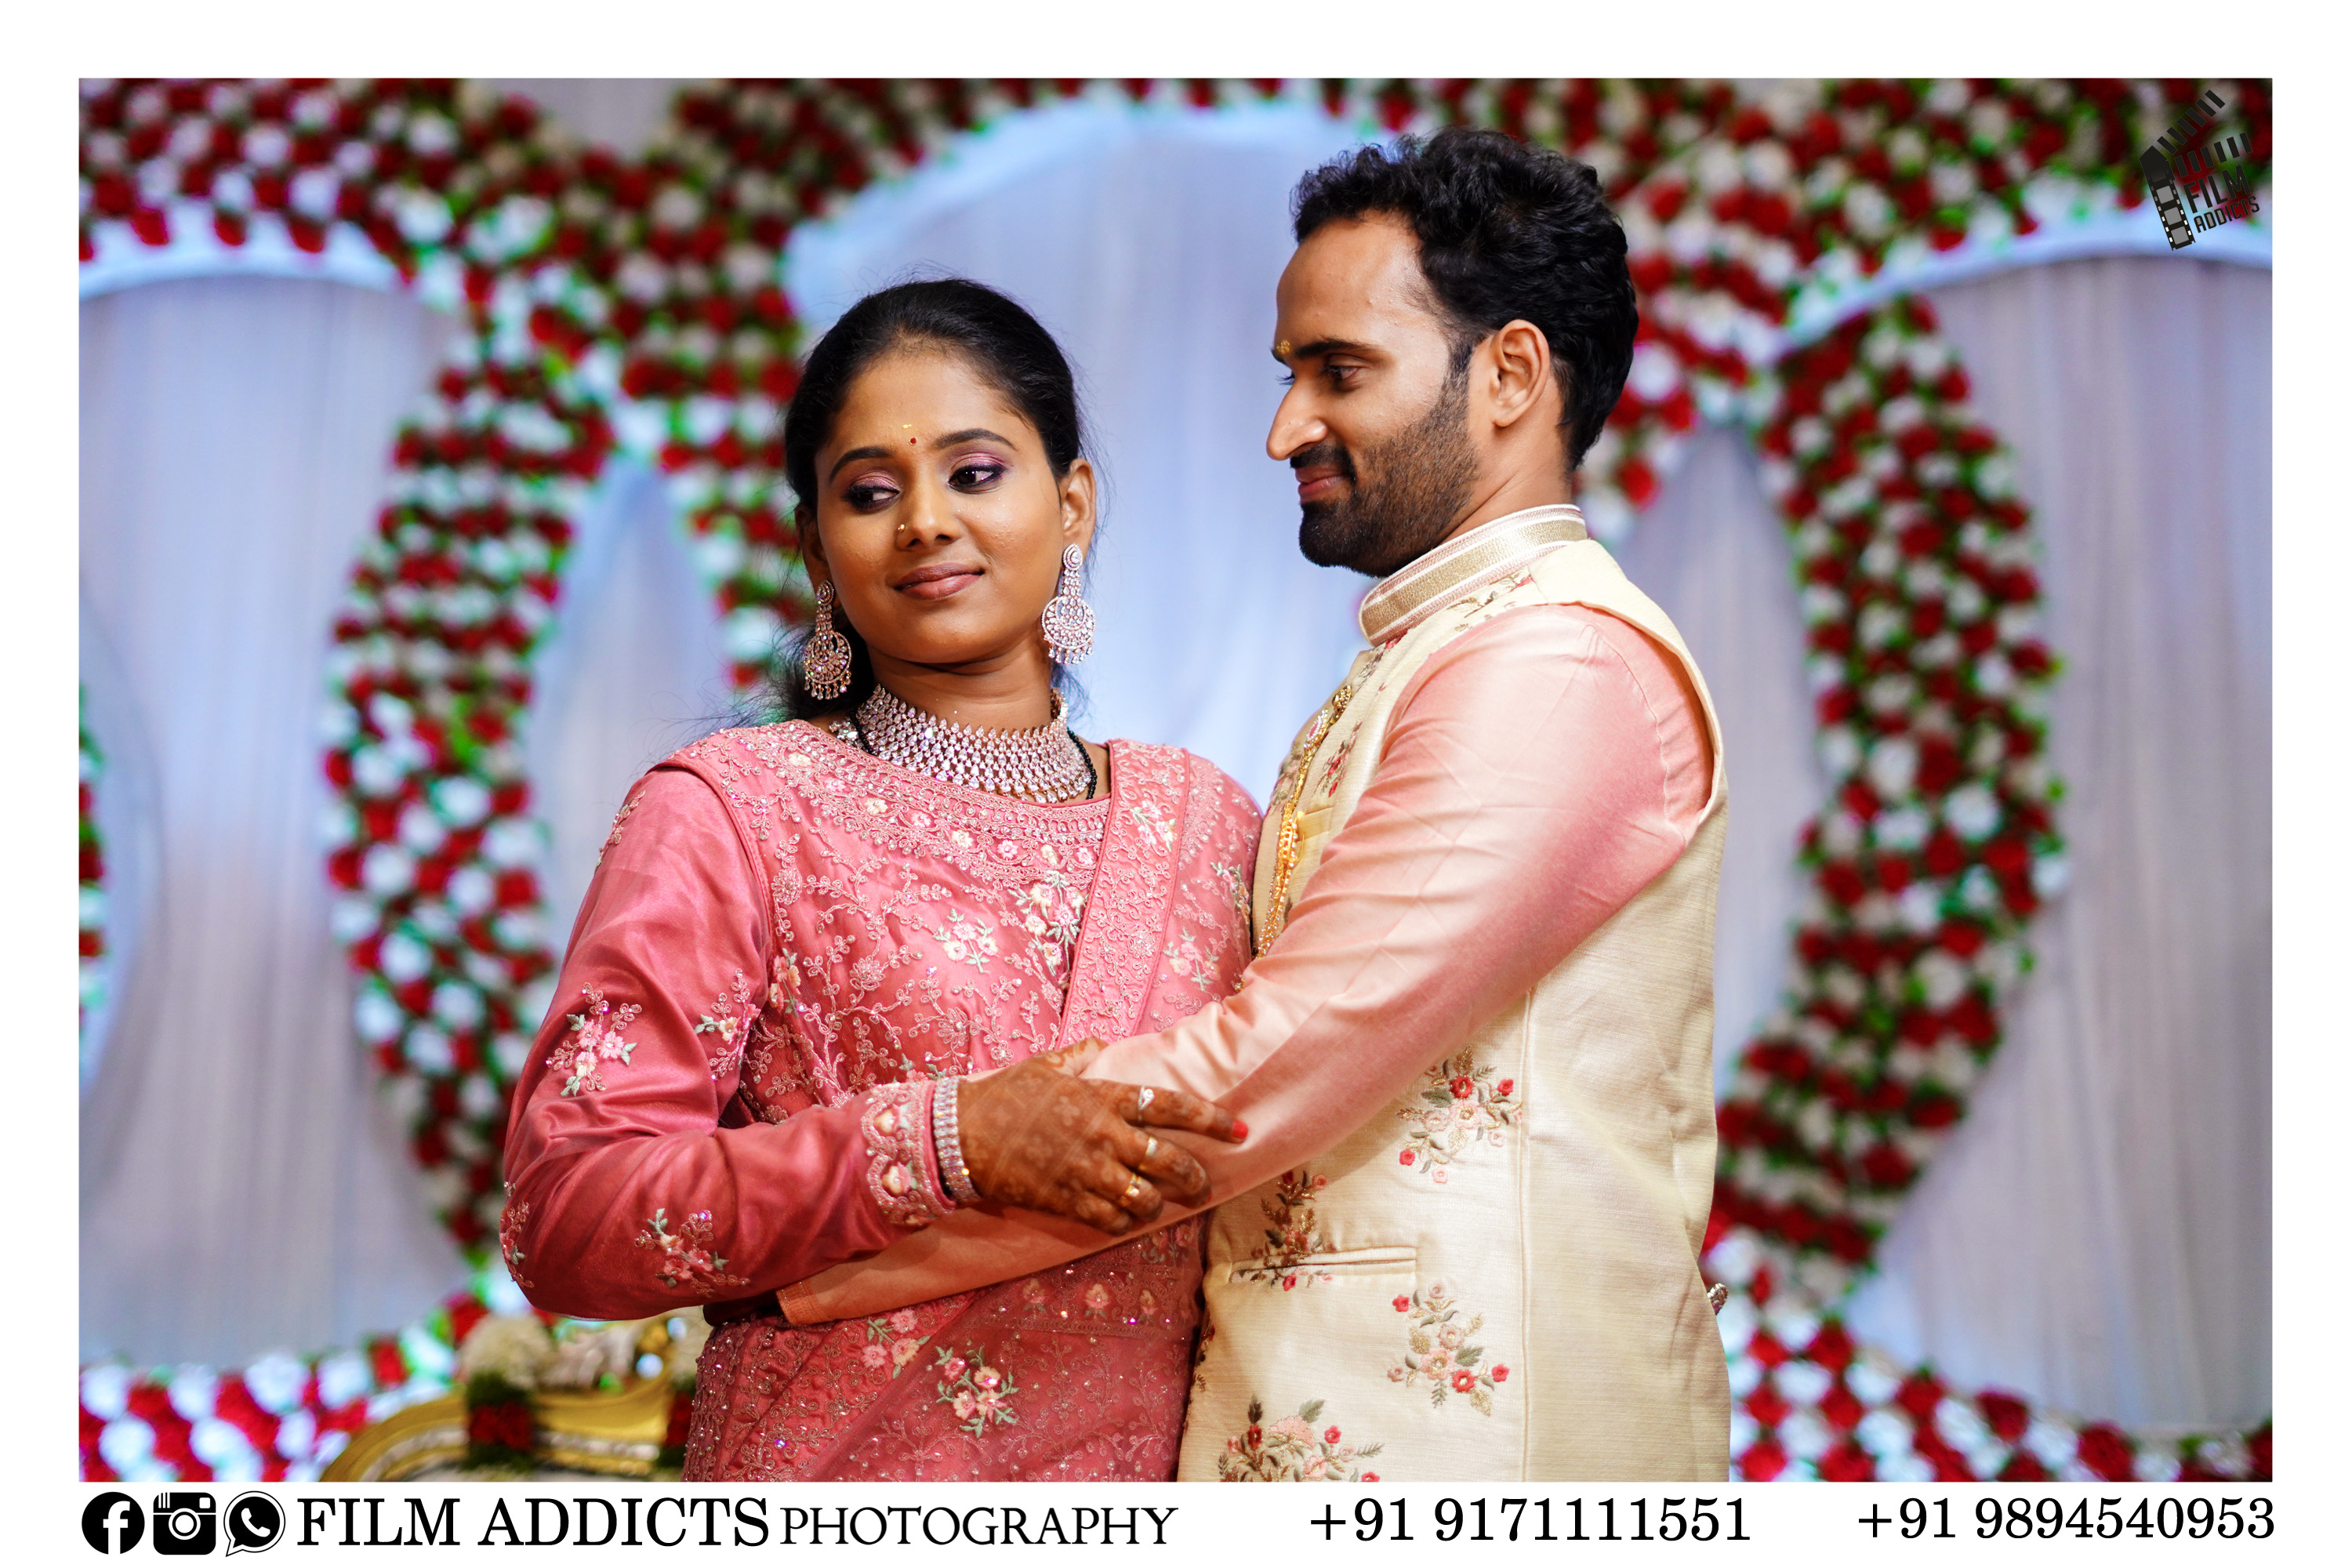 Proffesional Wedding Photographers in Theni-FilmAddicts Photography,best marraige photographers in Theni, best marraige photography in Theni, best candid photography, best Theni photography, Theni,Theni Wedding Planners, Best Wedding Planners in Theni,Wedding Planners in Theni, Best Wedding Photographers in Theni-FilmAddicts Photography, Best candid photographers in Theni, Best Wedding Candid photographers in Theni, Wedding Candid Moments, FilmAddicts, Photography, FilmAddictsPhotography, best wedding in Theni, Best Candid shoot in Theni, best moment, Best wedding moments, Best wedding photography in Theni, Best wedding videography in Theni, Best couple shoot, Best candid, Best wedding shoot, Best wedding candid, Theni photography, Theni couples, candid shoot, candid, tamilnadu wedding photography, best photographers in Theni, tamilnadu